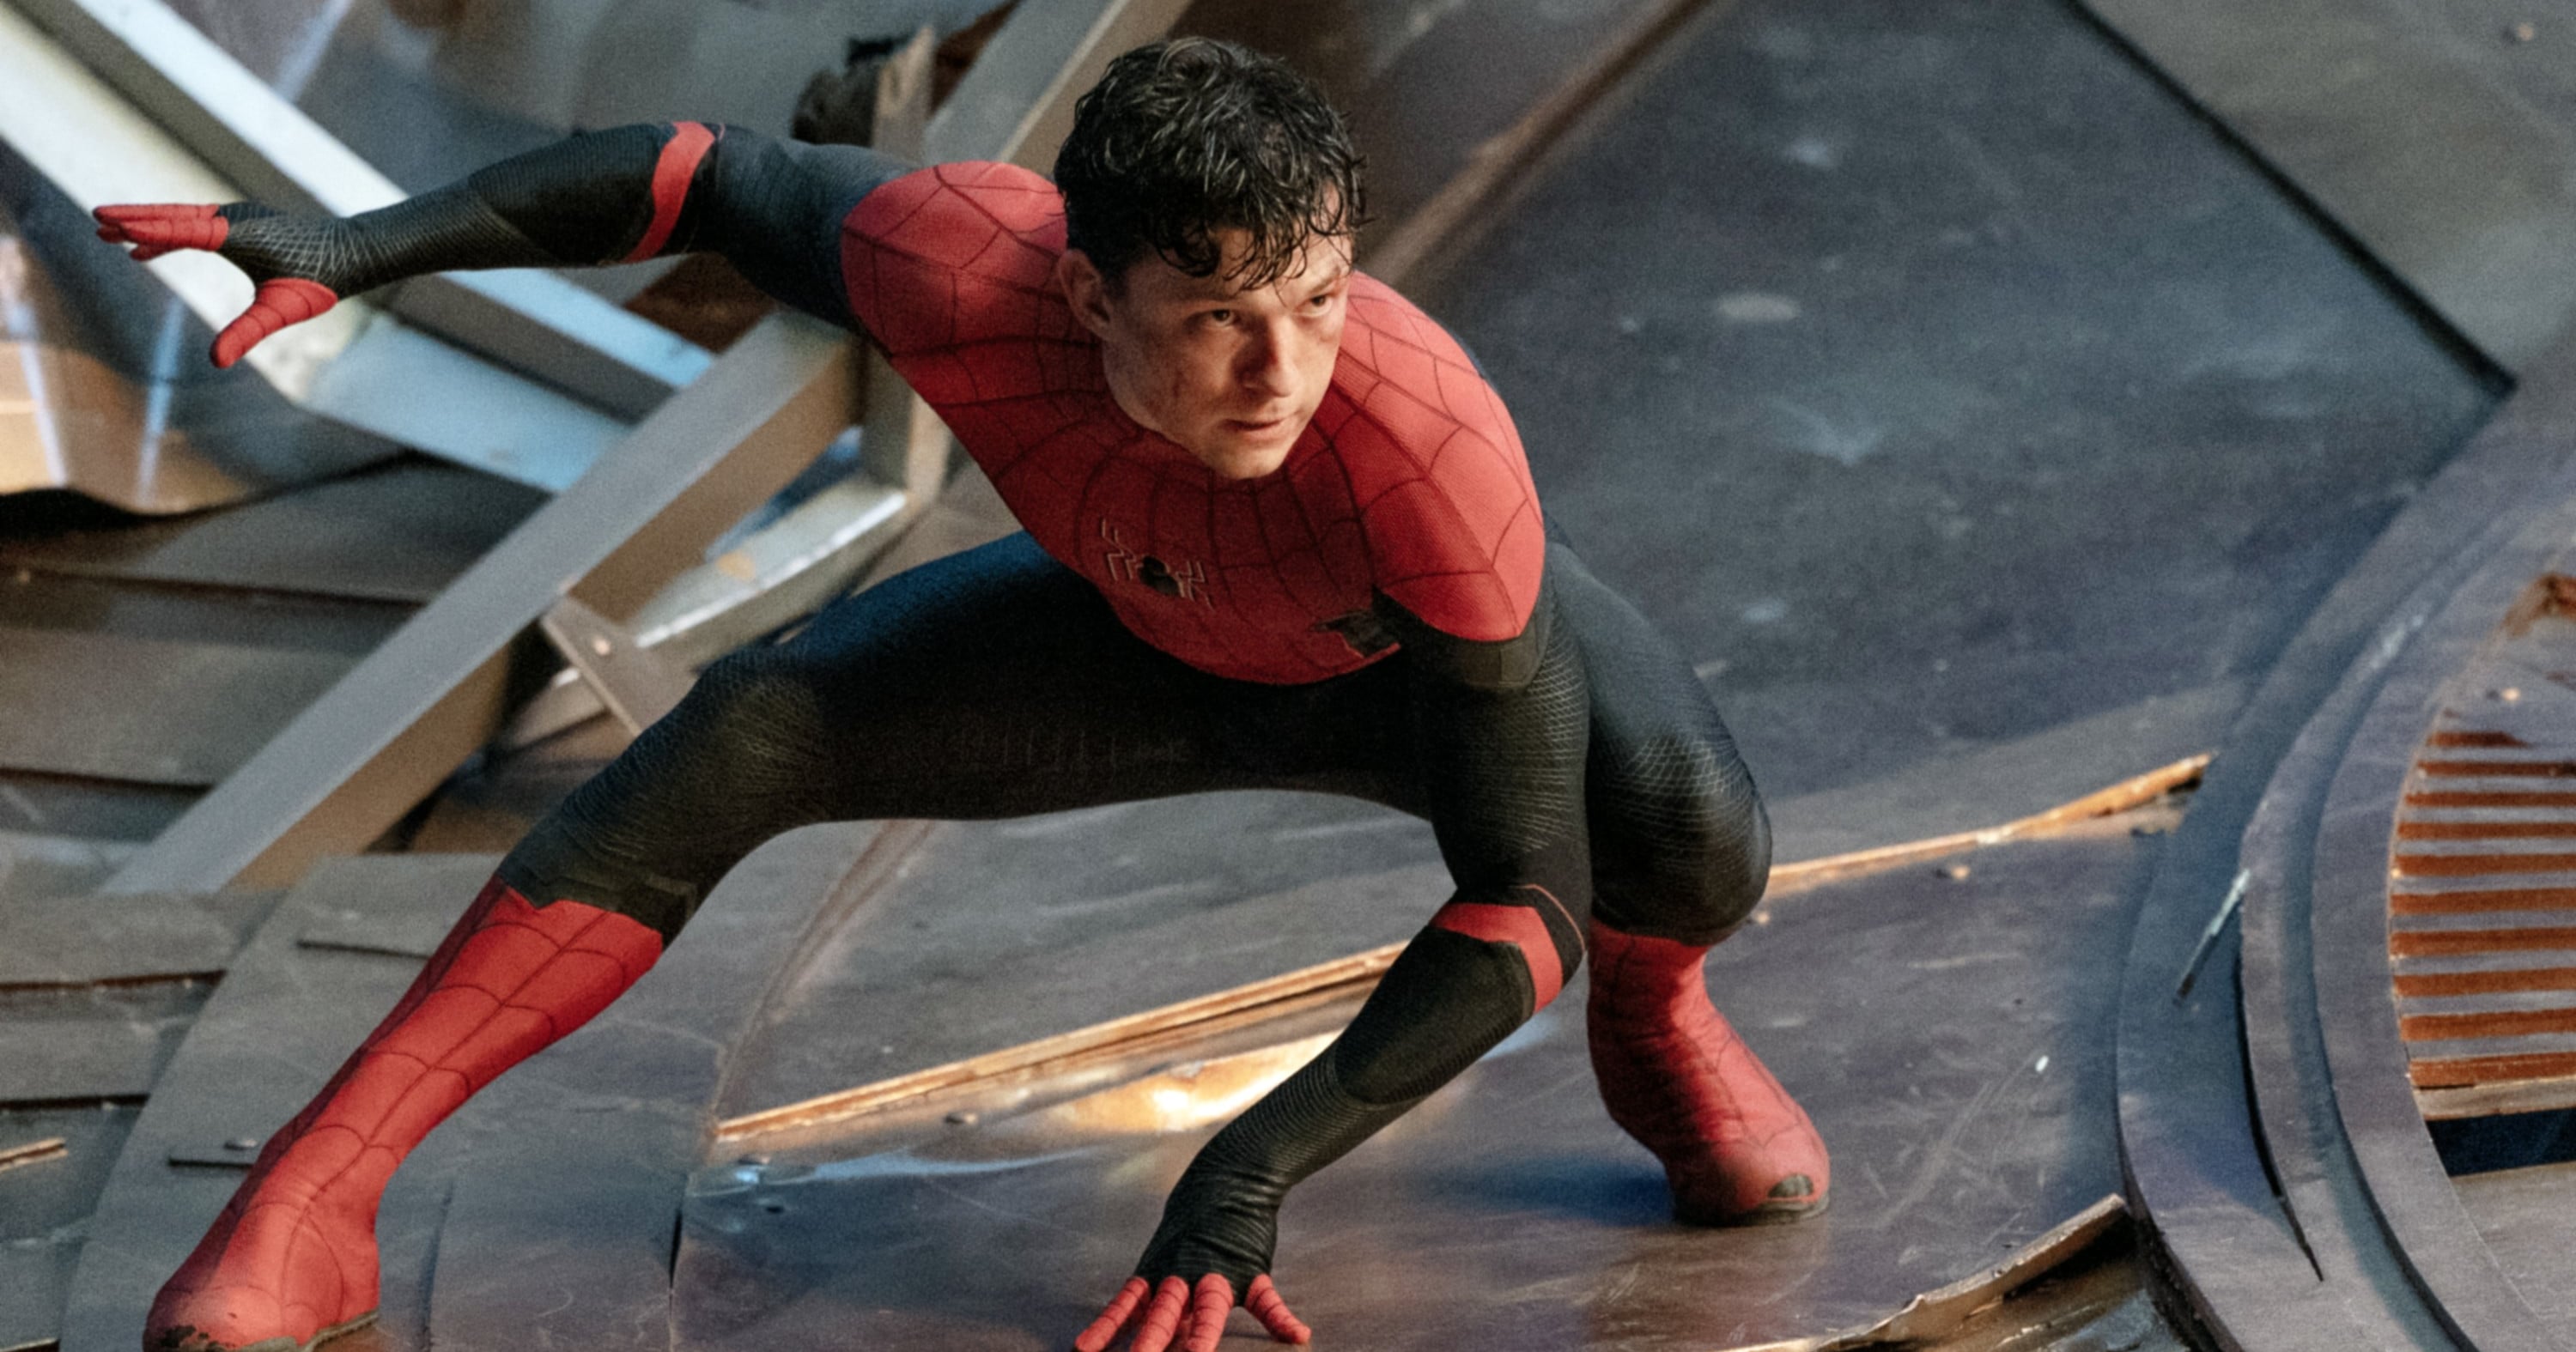 Tobey Maguire Wants To Play Spider-Man Again - In The MCU